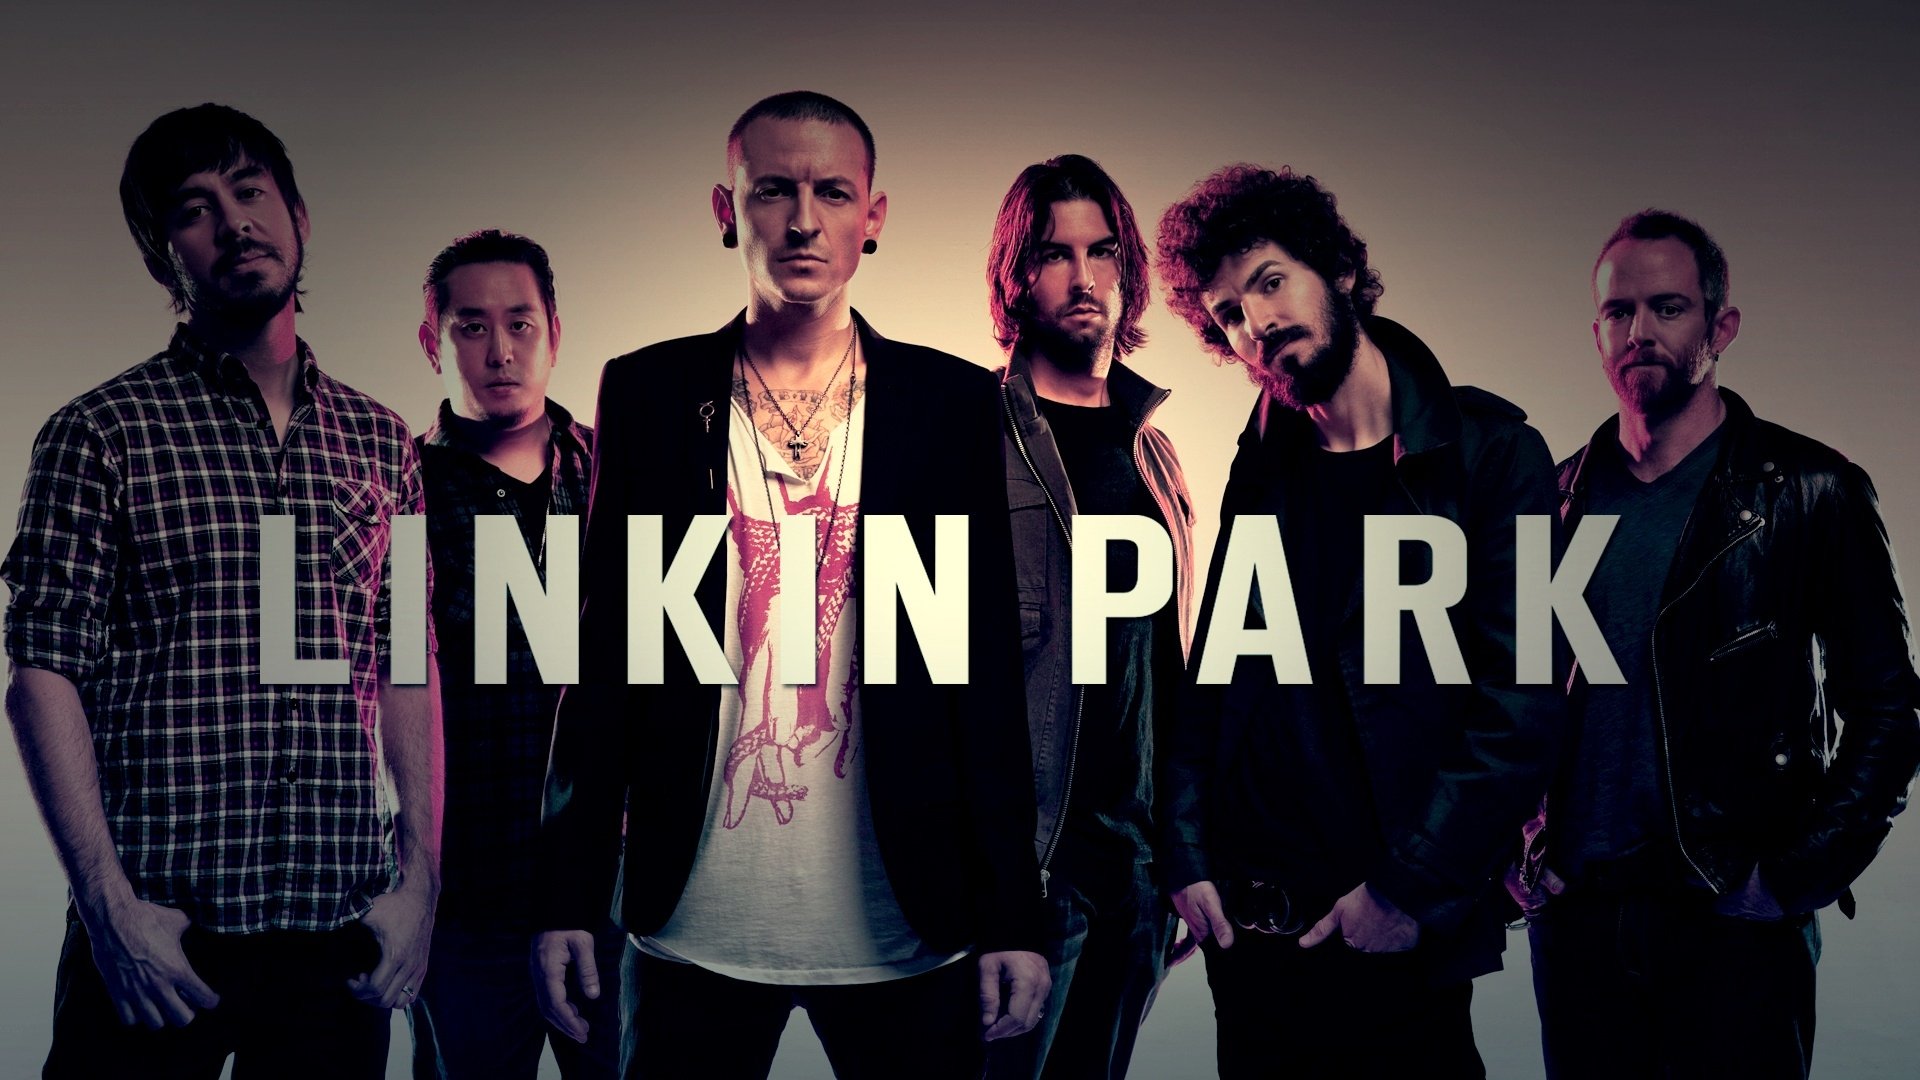 who did linkin park first tour with